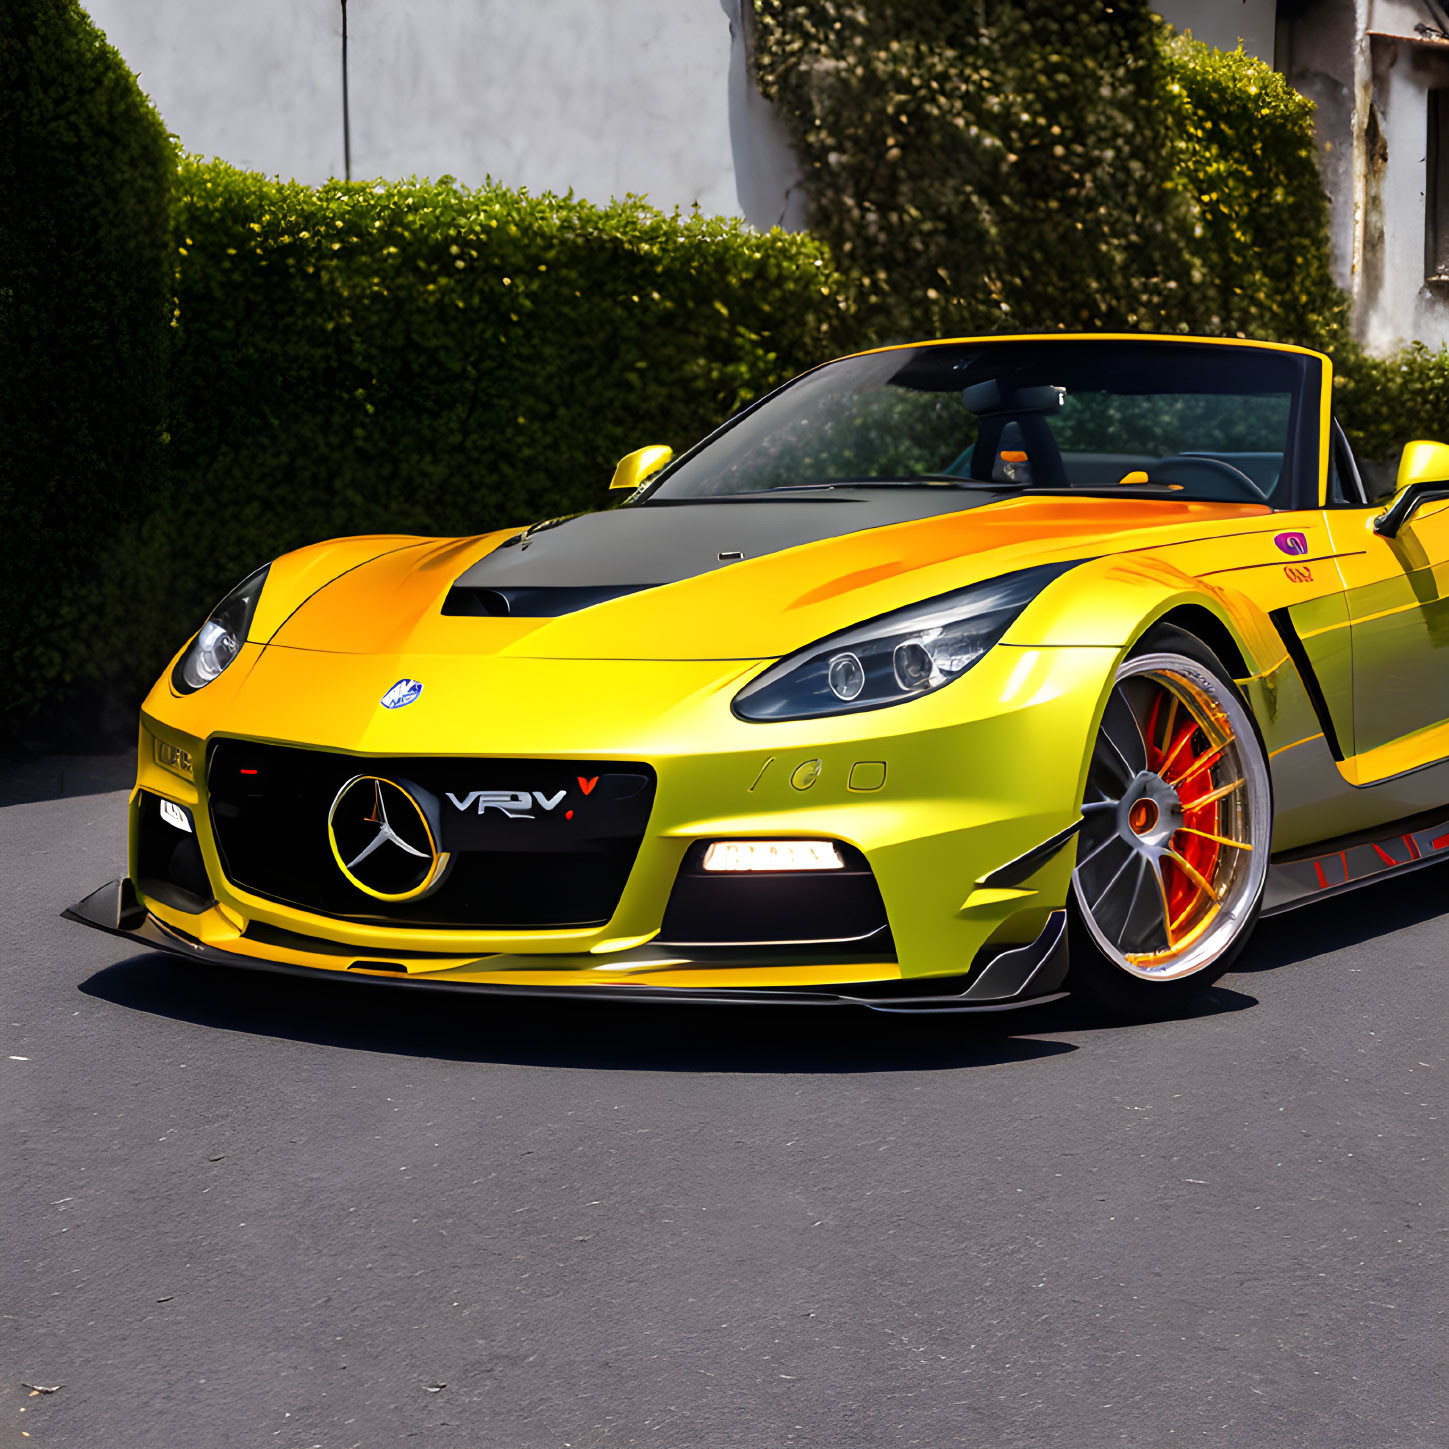 Yellow sports car with black accents and custom rims parked in front of white wall with green foliage